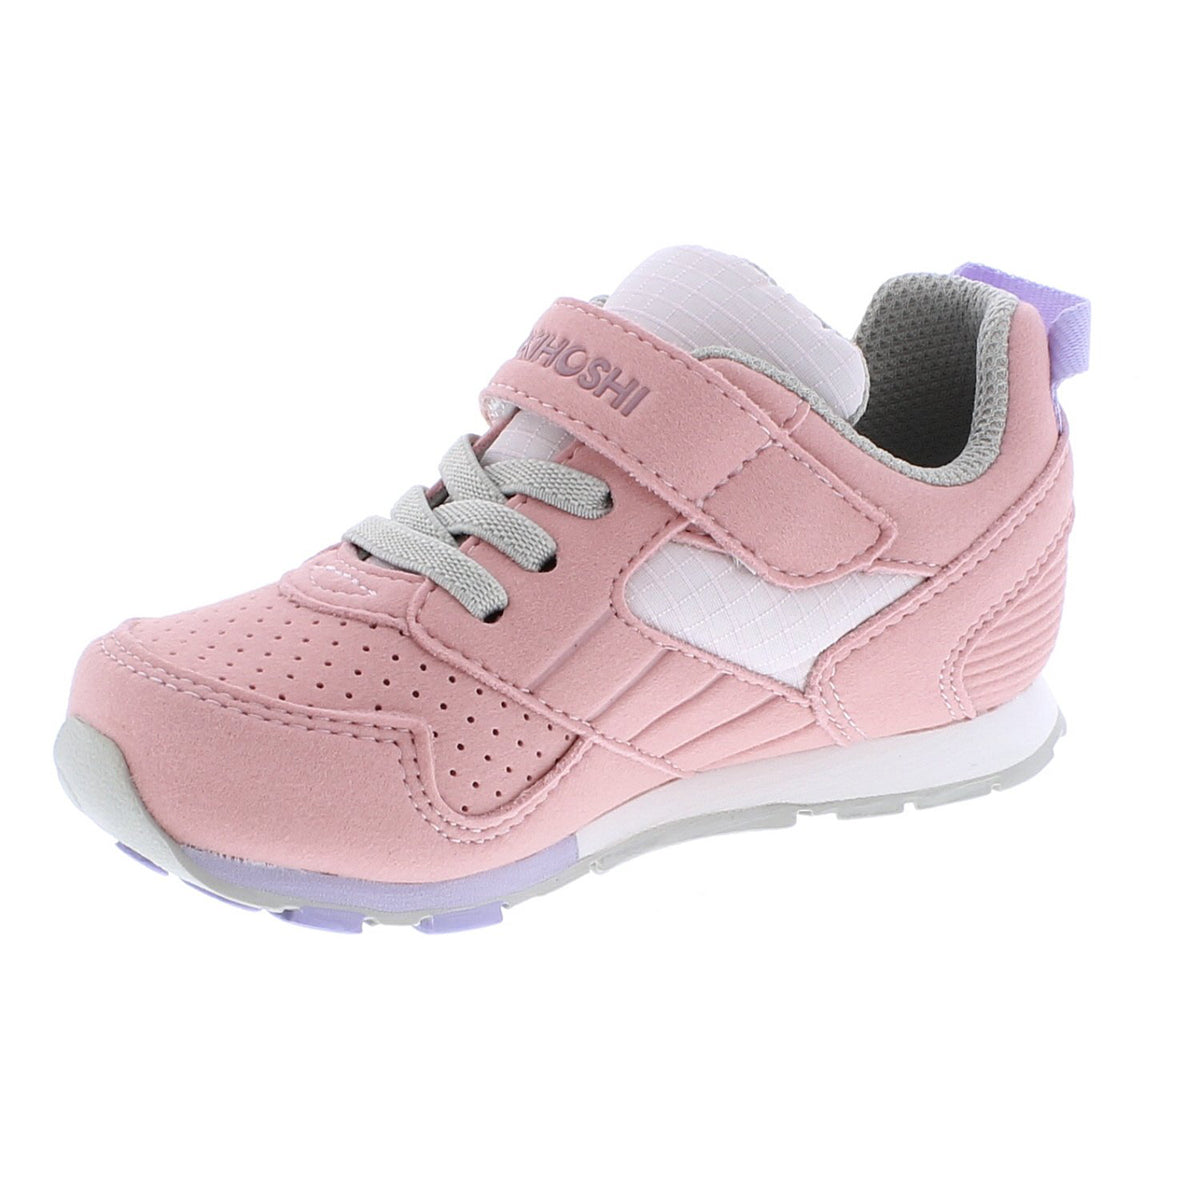 Baby Tsukihoshi Racer Sneaker in Rose/Pink from the front view